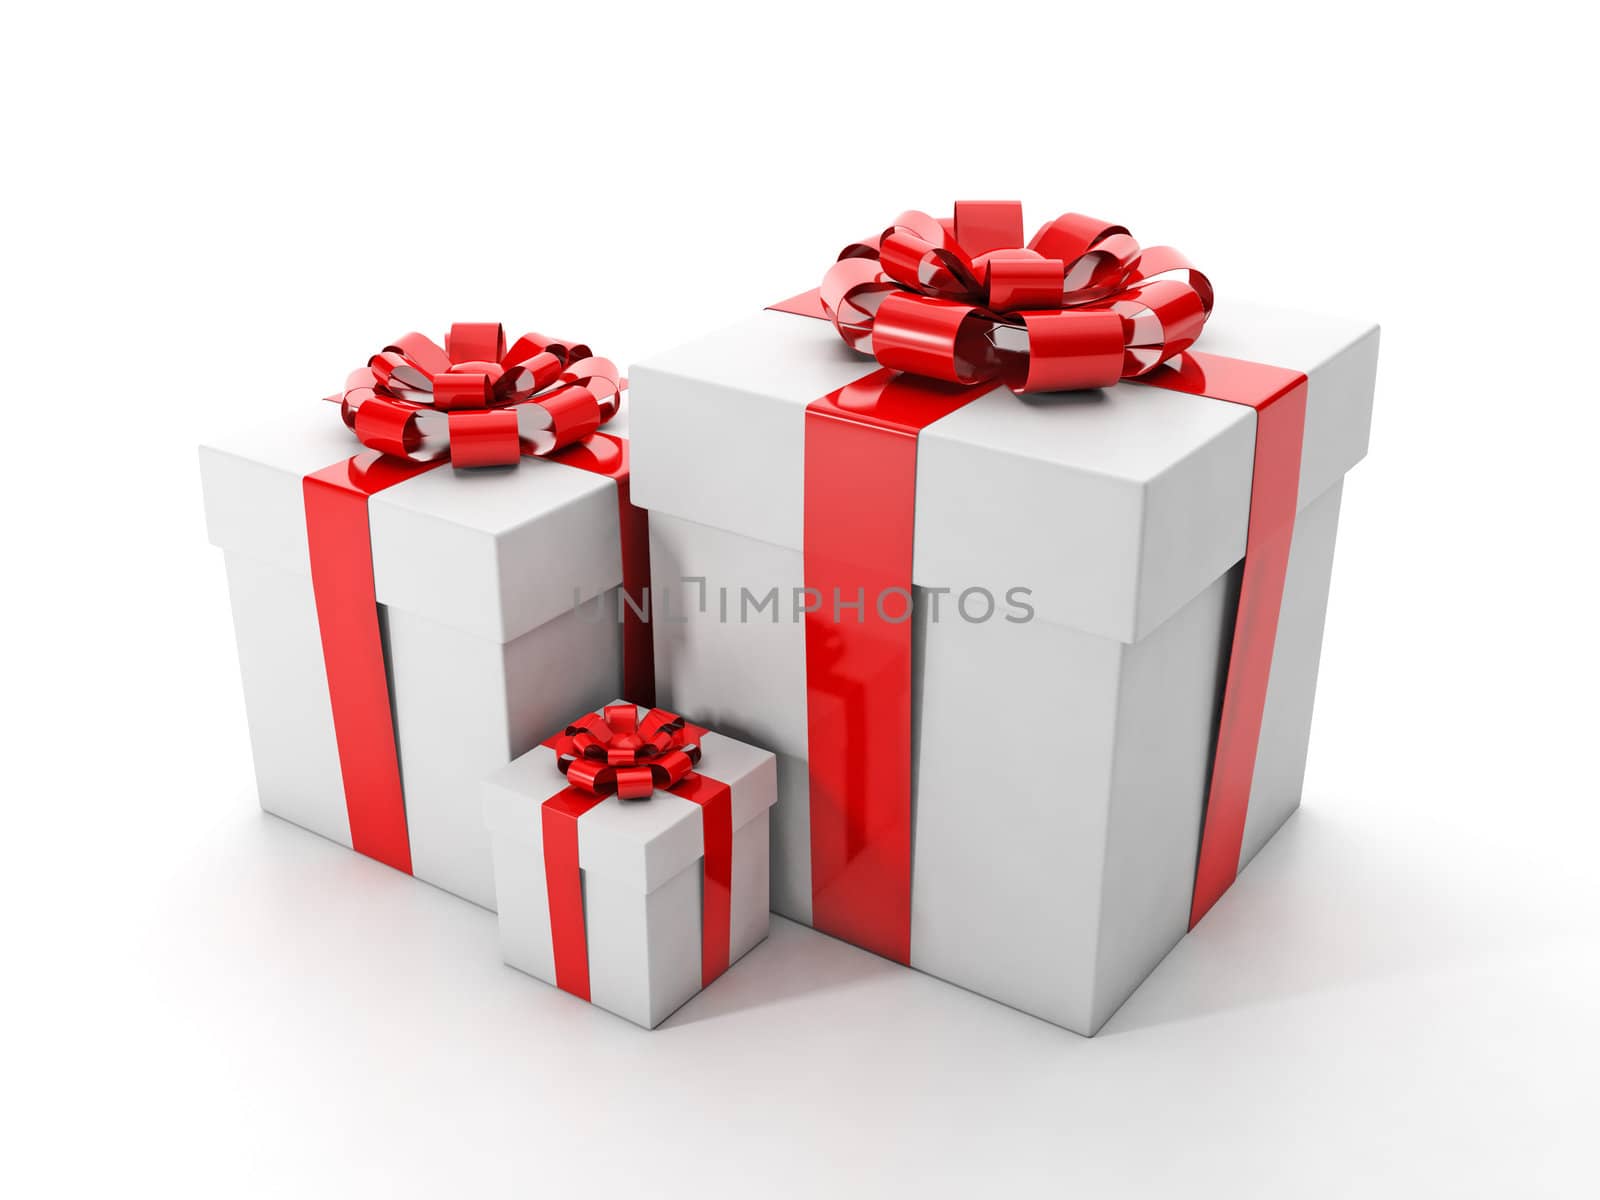 Group gifts on a white background. Holiday greetings